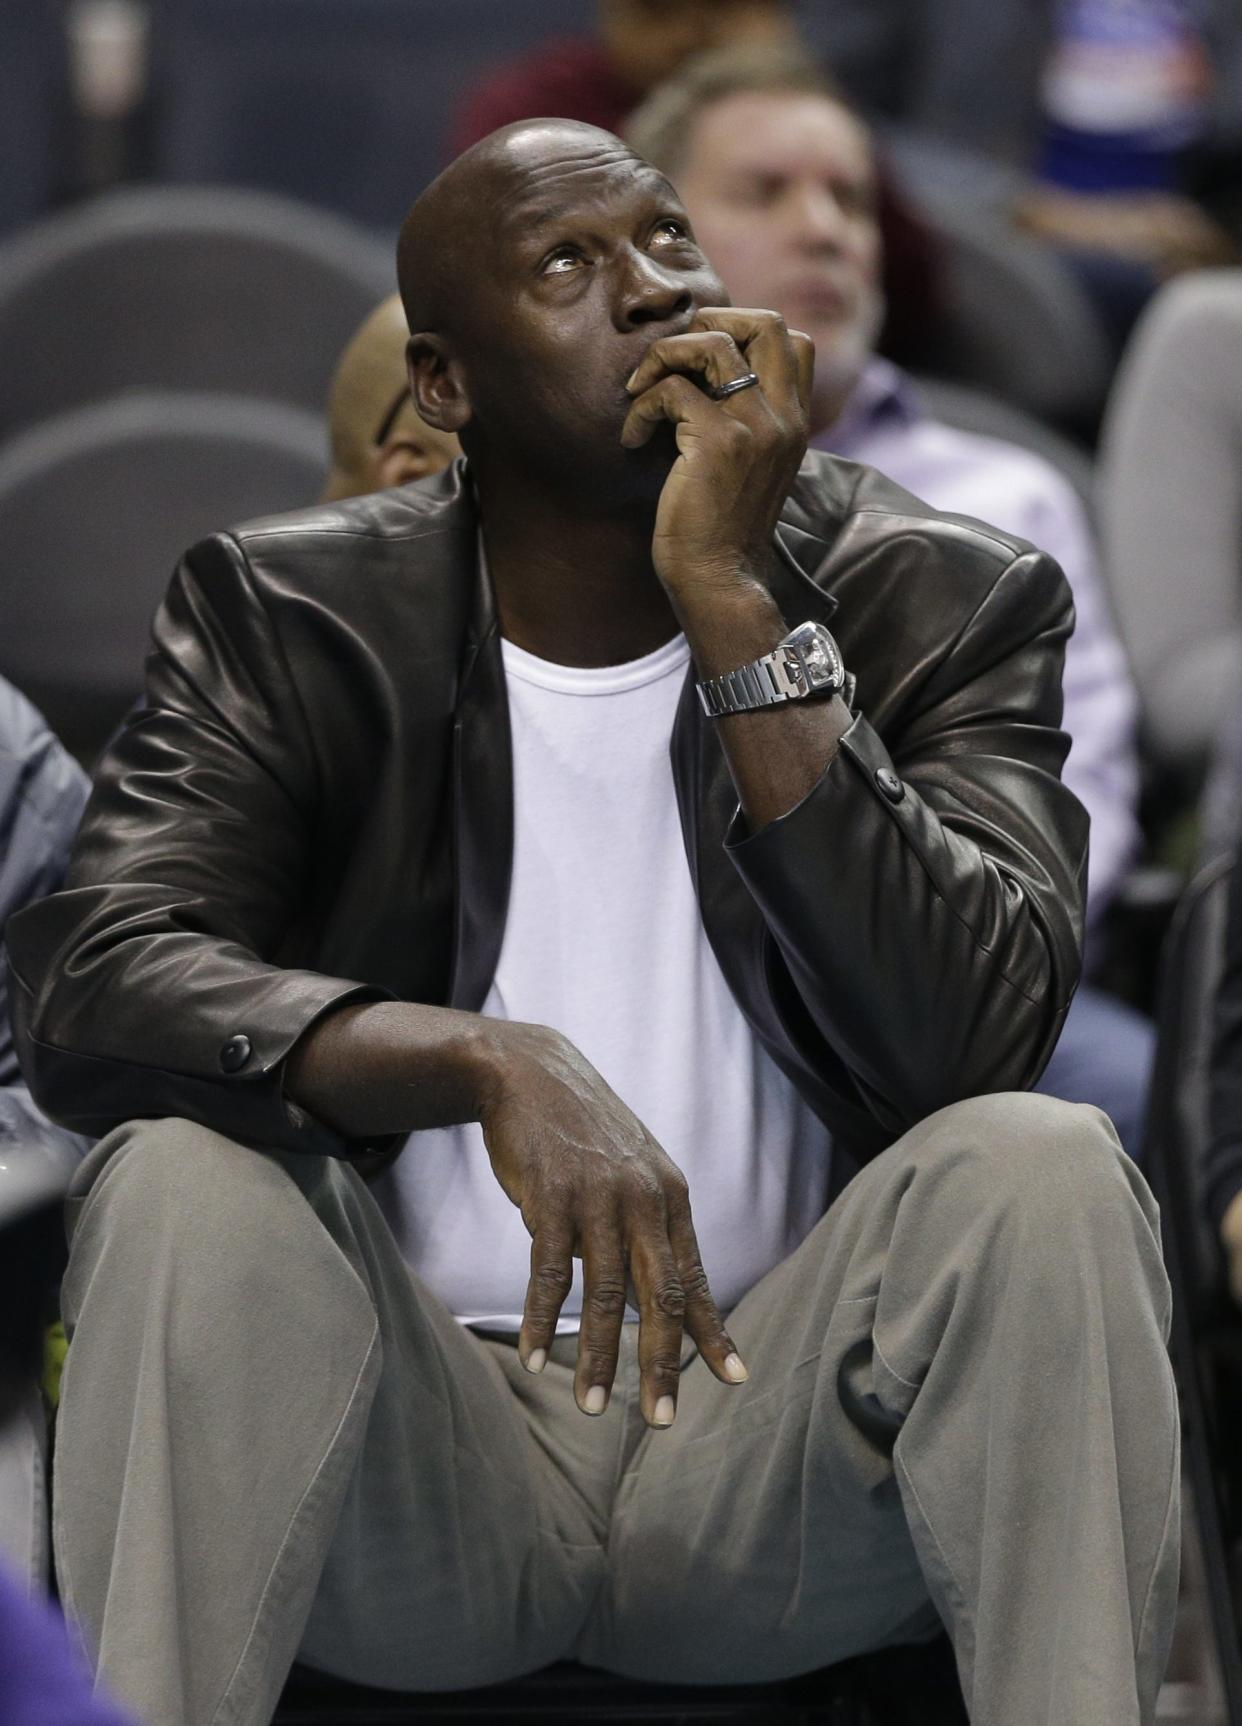 Charlotte Hornets owner Michael Jordan looks at a scoreboard in the first half of an NBA basketball game against the Portland Trail Blazers in Charlotte, N.C., Wednesday, Jan. 18, 2017. (AP Photo/Chuck Burton)